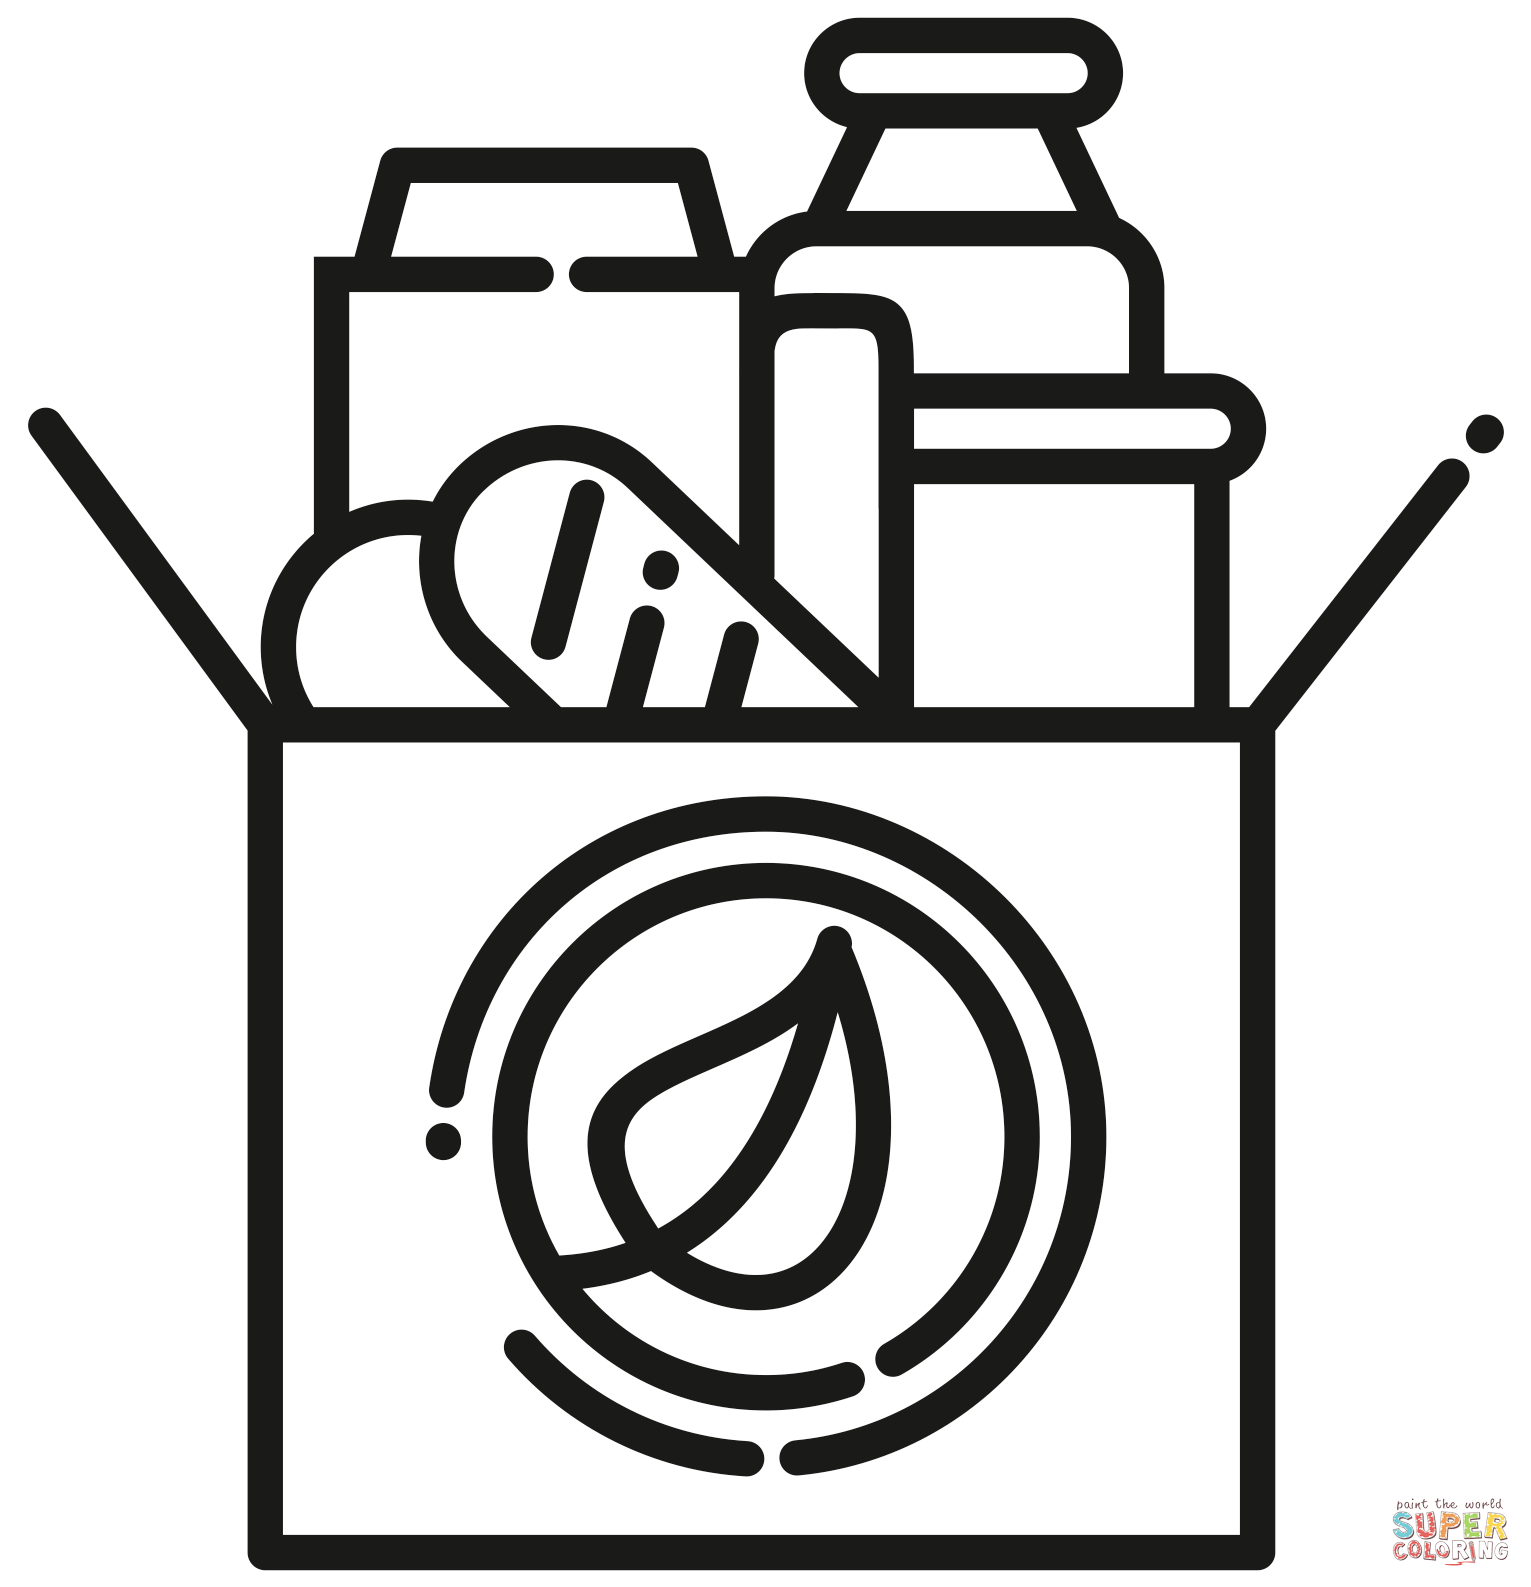 Food pantry coloring page free printable coloring pages